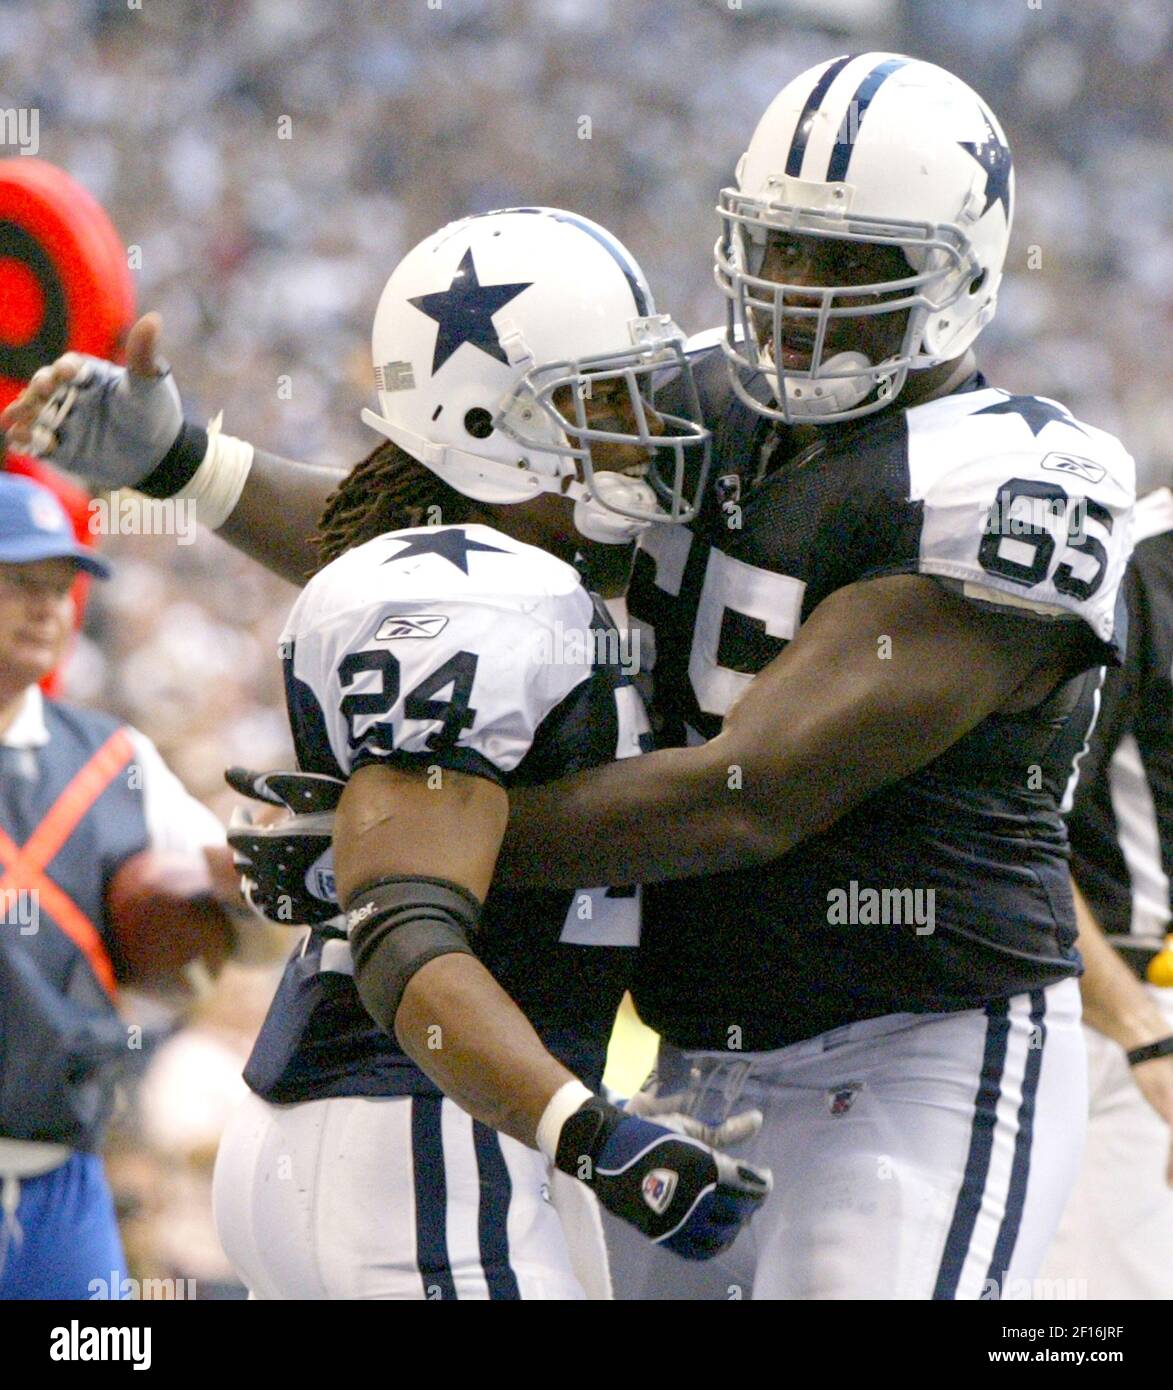 The Dallas Cowboys' Marino Barber (24) iws congratulated by Andre Gurode after scoring a touchdown in the third quarter against the Tampa Bay Buccaneers on Thursday, November 23, 2006, in Irving, Texas. (Photo by Khampha Bouaphanh/Fort Worth Star-Telegram/MCT/Sipa USA) Stock Photo